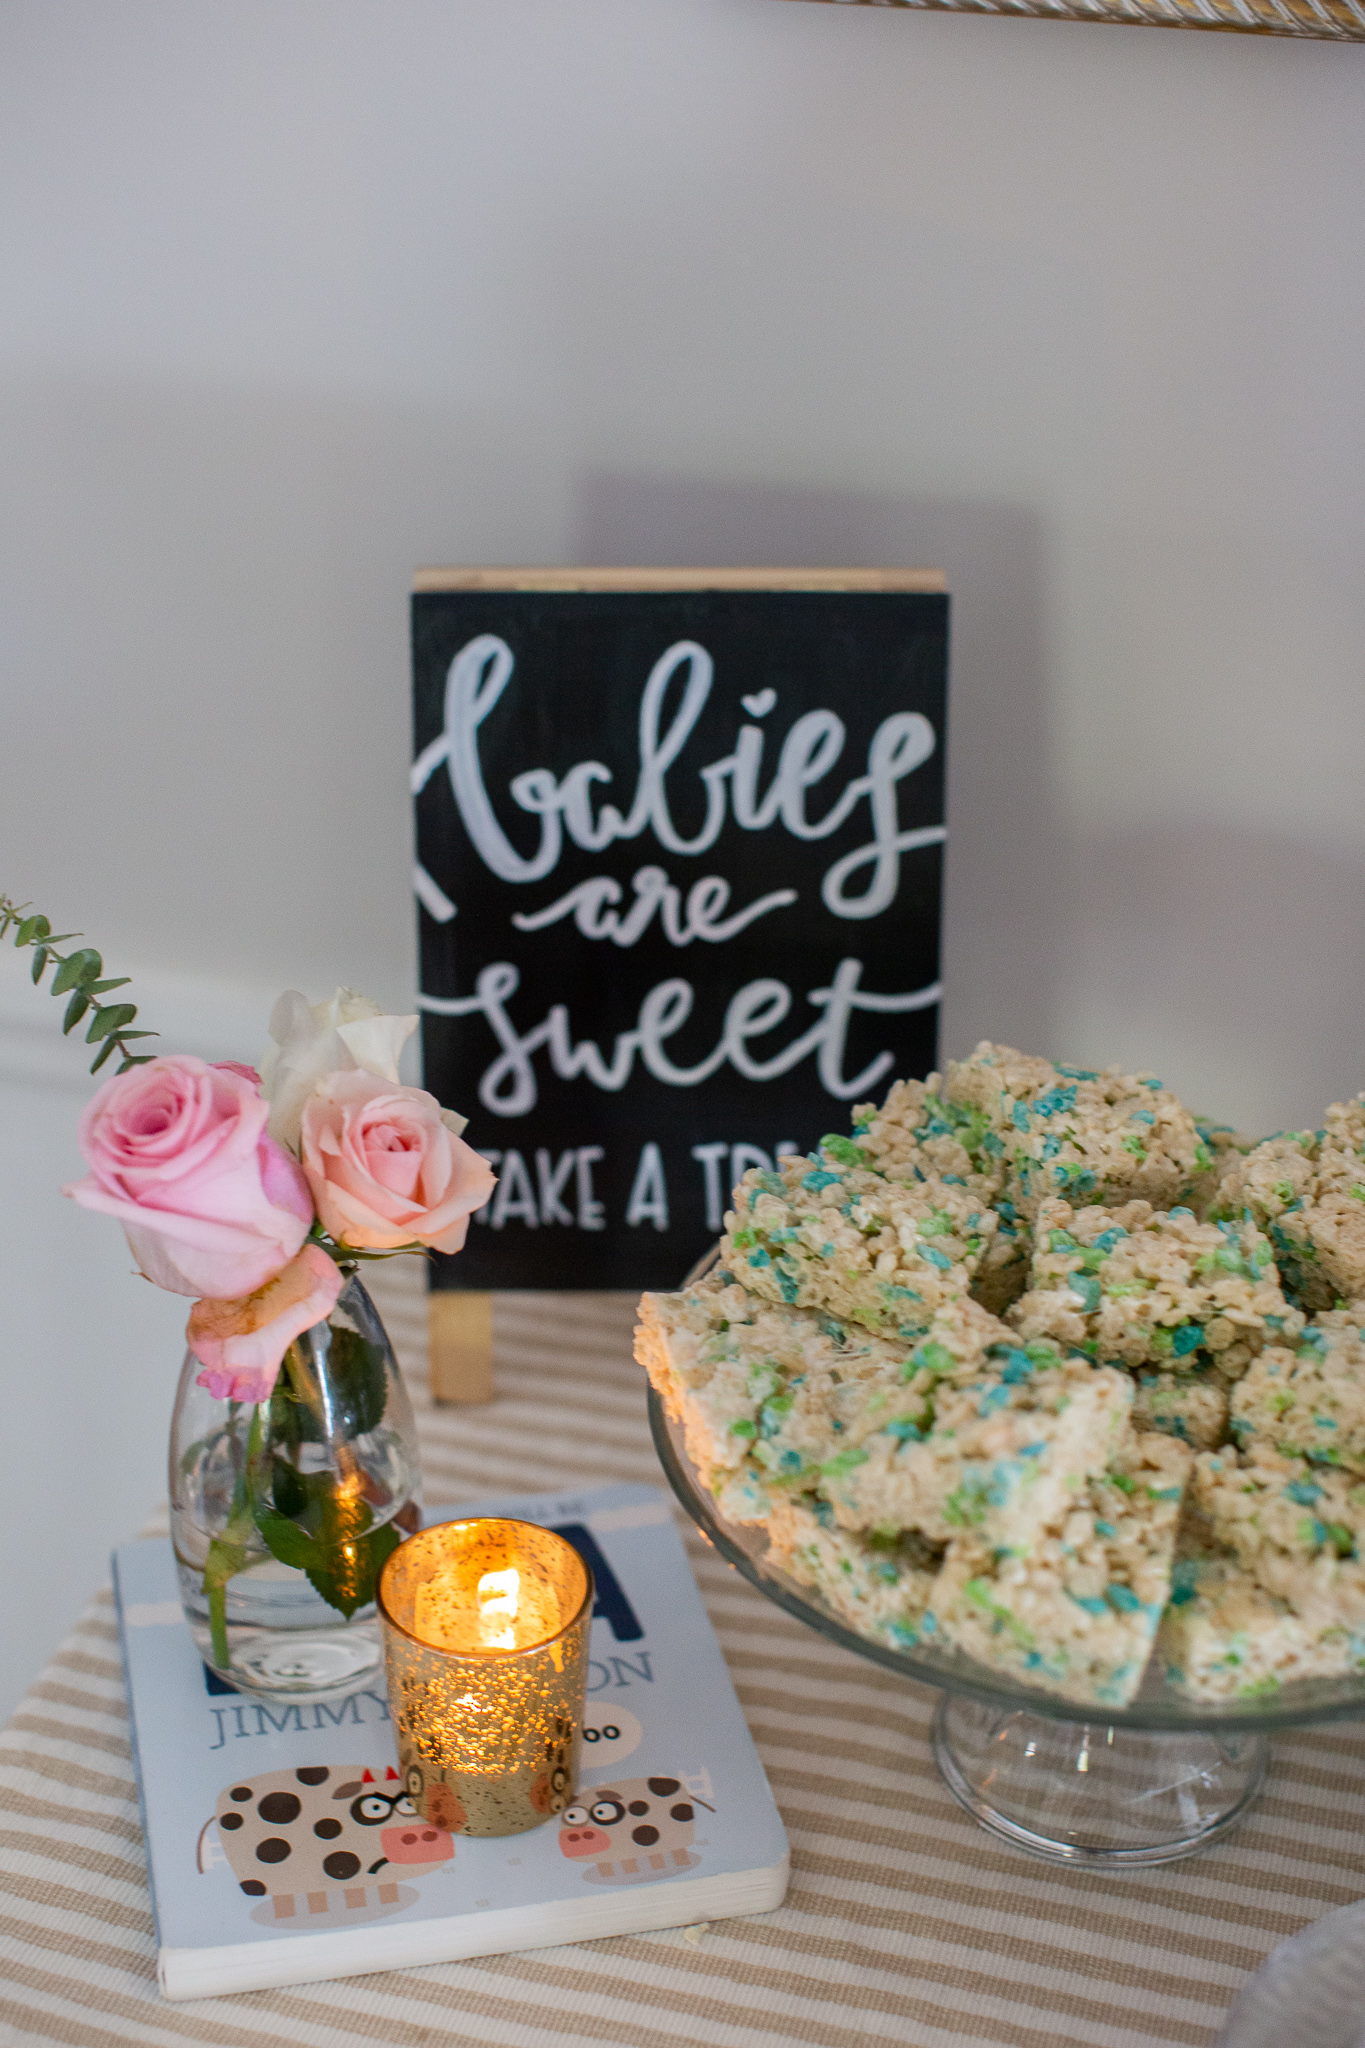  Story Book Baby Shower Ideas by popular North Carolina life and style blog, Coffee Beans and Bobby Pins: image of blue and green rice krispie treats, gold candle votive, small vase with roses in it, and children's picture book.